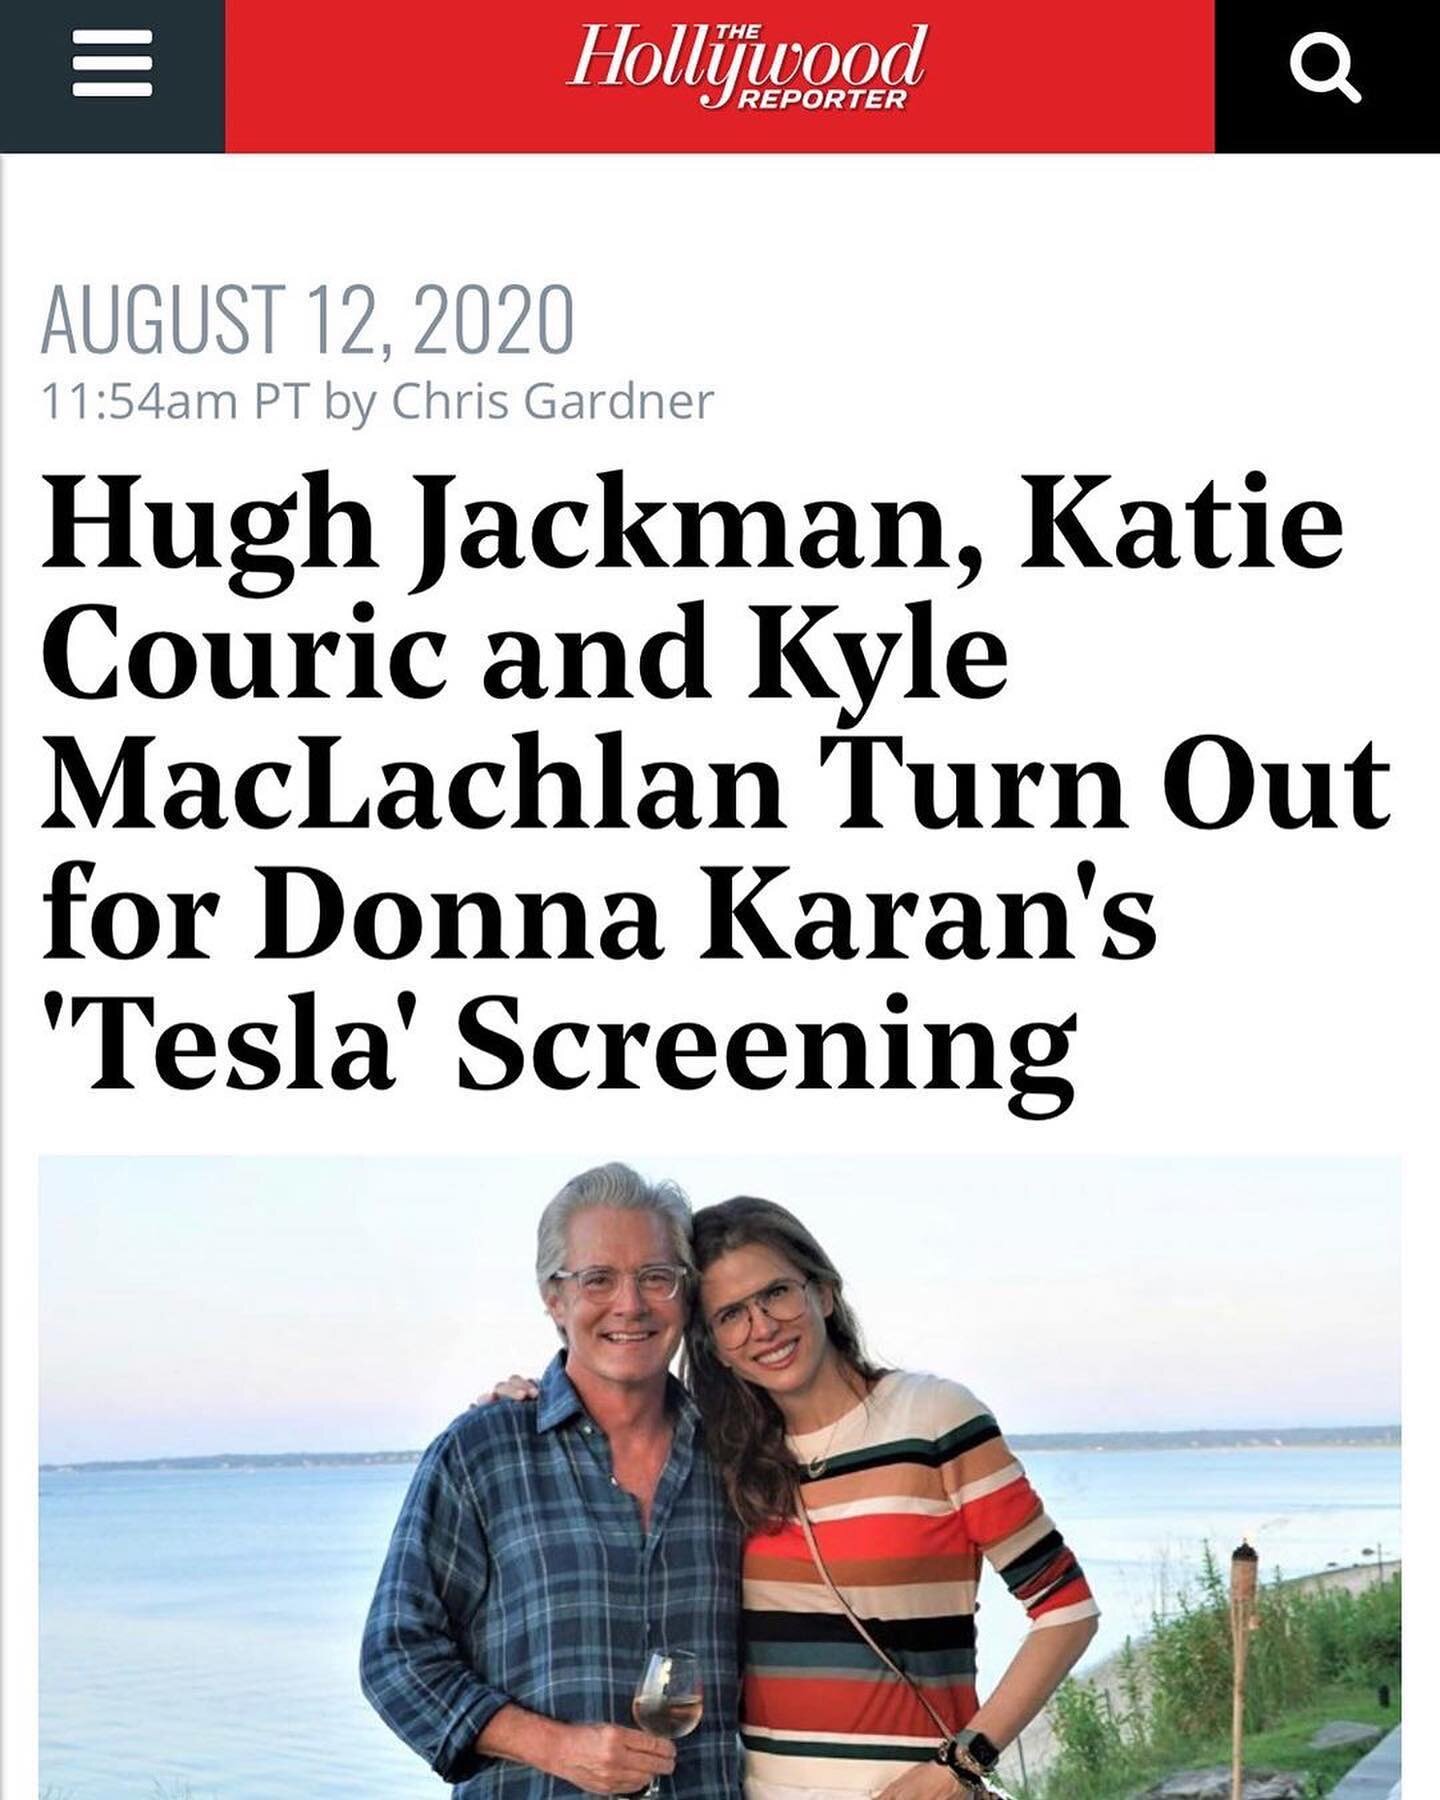 Special screening of TESLA which is coming out August 21st. We can&rsquo;t wait to share it with you @teslamovie 🎉🎉🎉 thank you @hollywoodreporter for the feature 🤘@ethanhawke @kyle_maclachlan @jimgaffigan @memphisevehewson @thehughjackman @katiec